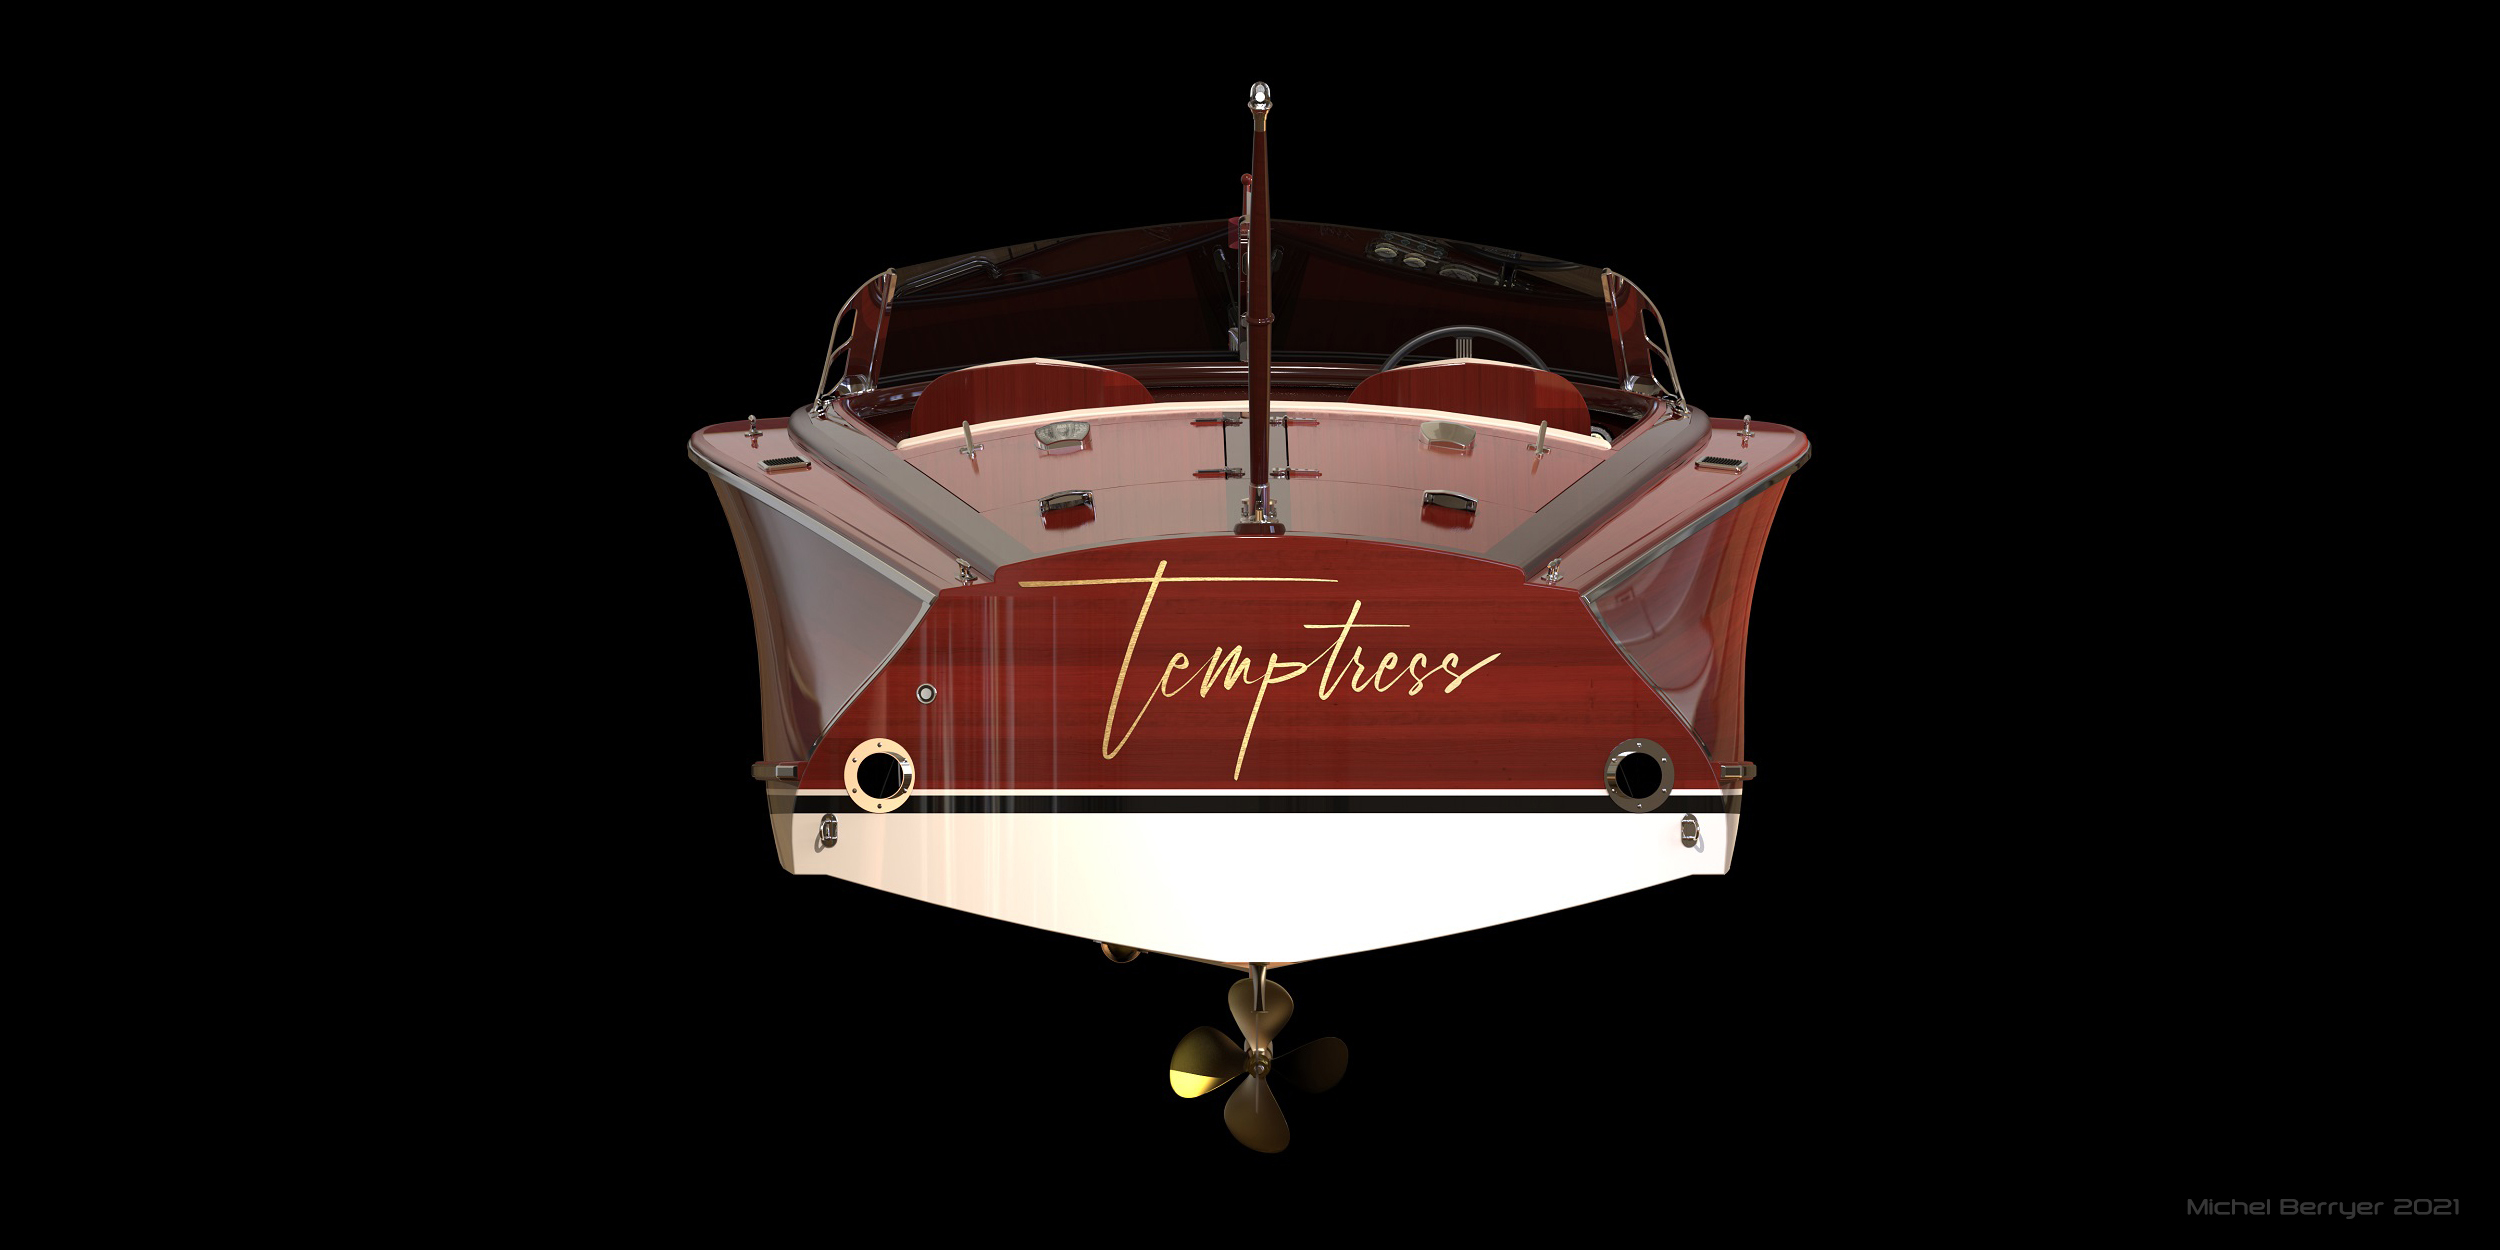 Temptress Boat the Modern Wood Yacht Tender copy